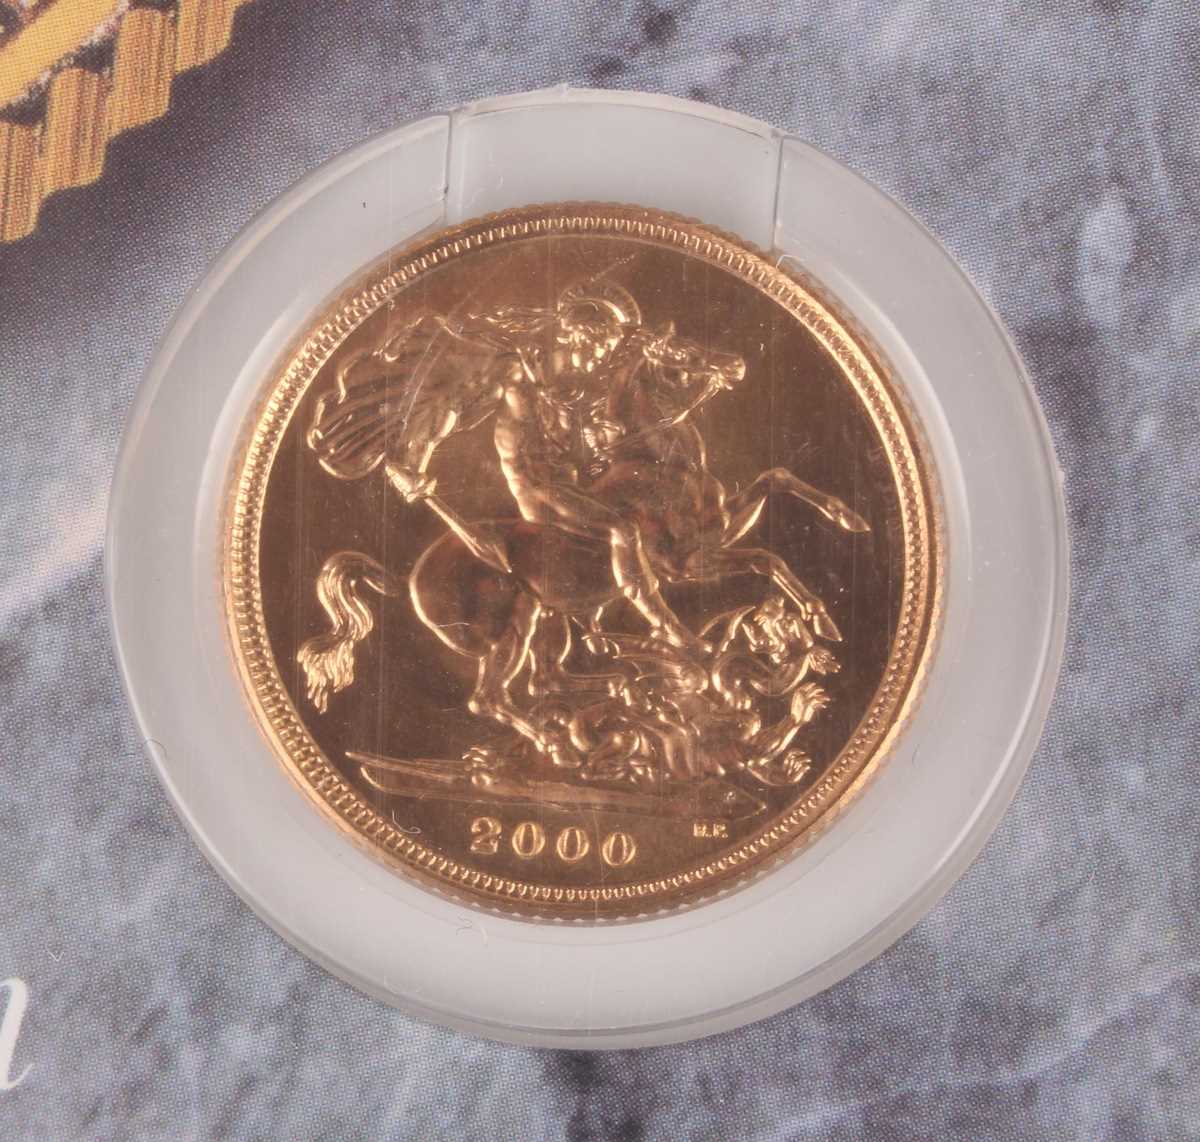 An Elizabeth II Gold Bullion sovereign 2000, mounted within a presentation card gift pack. - Image 2 of 2